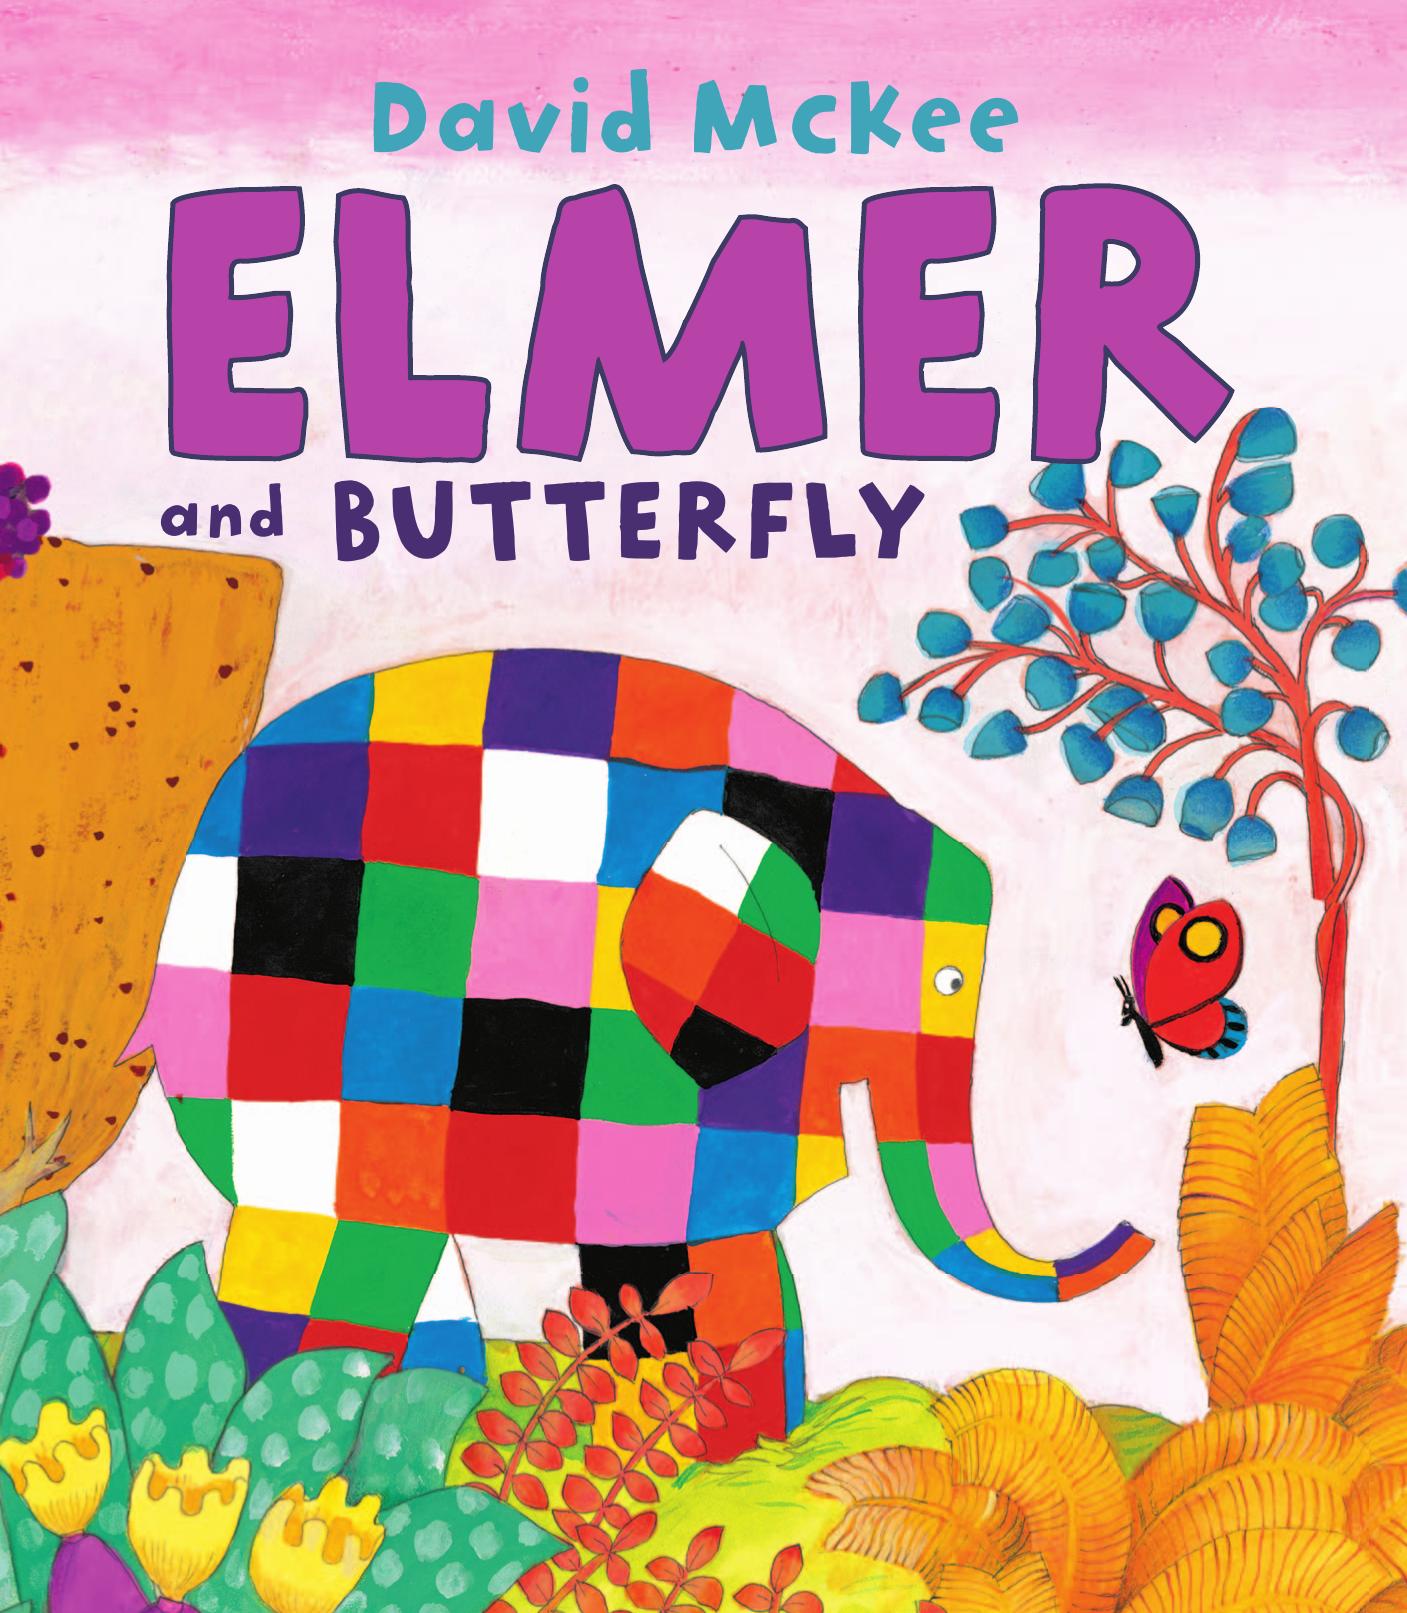 Elmer and Butterfly